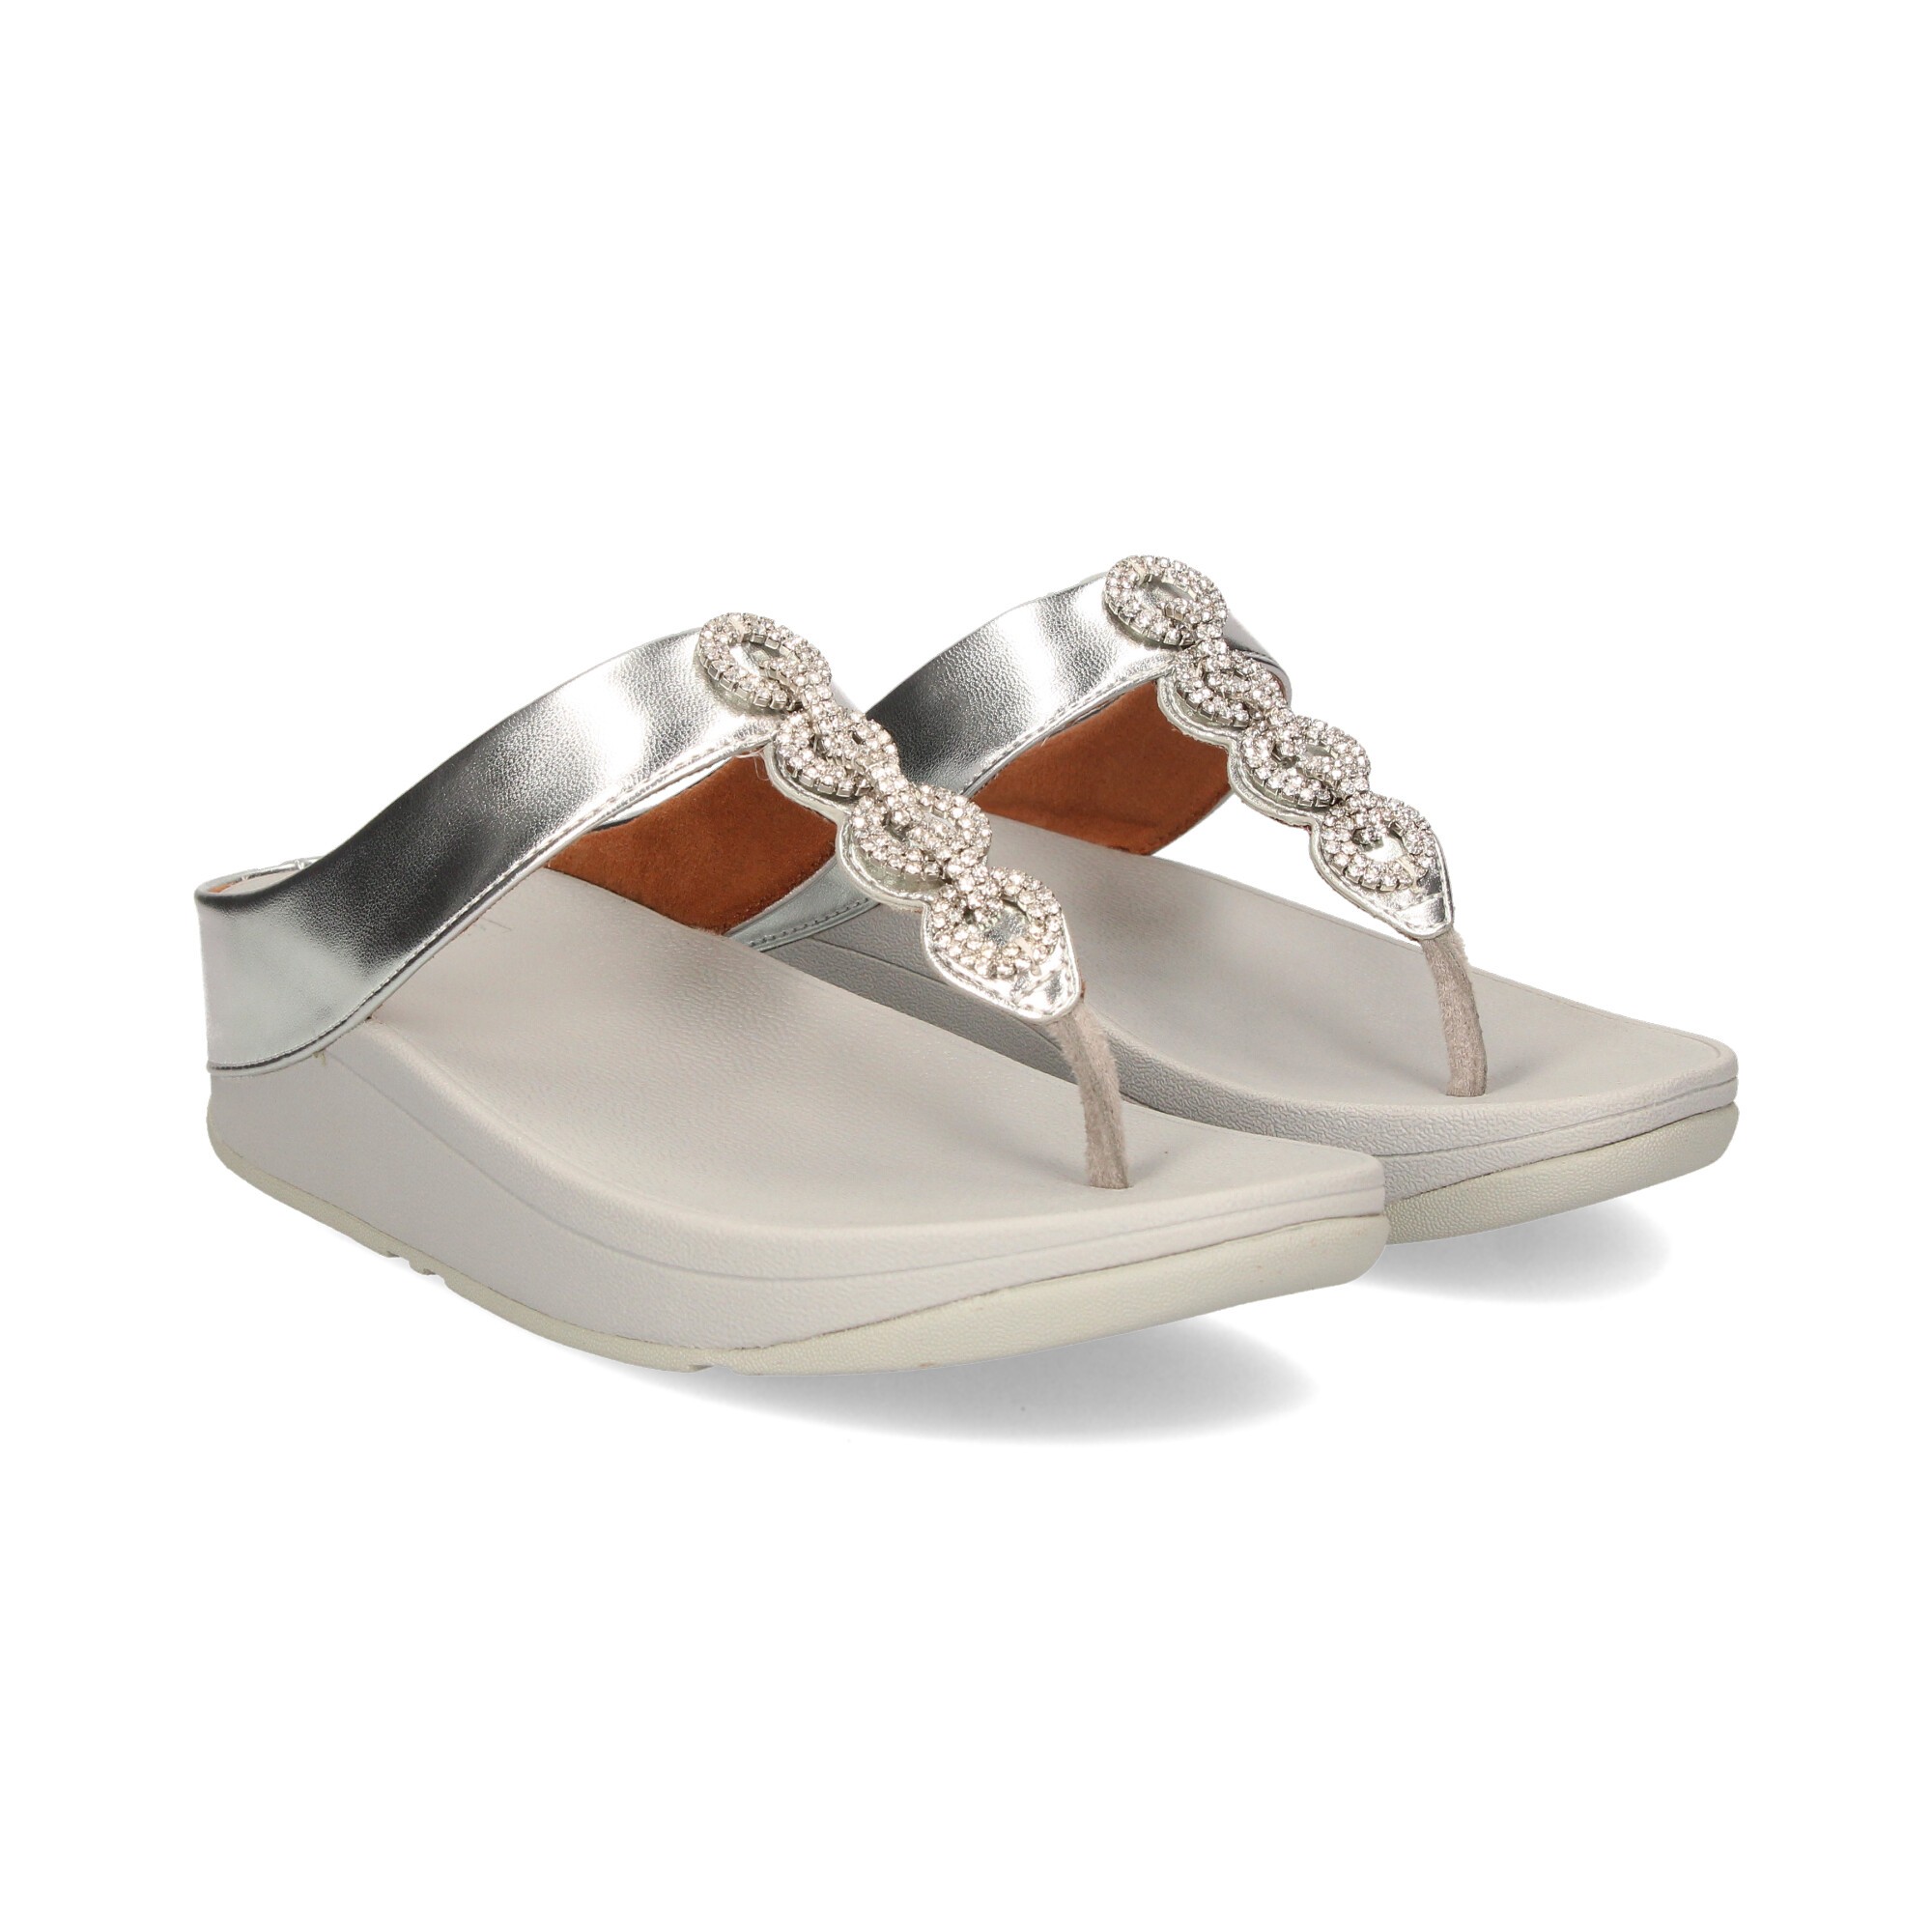 FITFLOP Sandalias de Mujer OLIVE SILVER